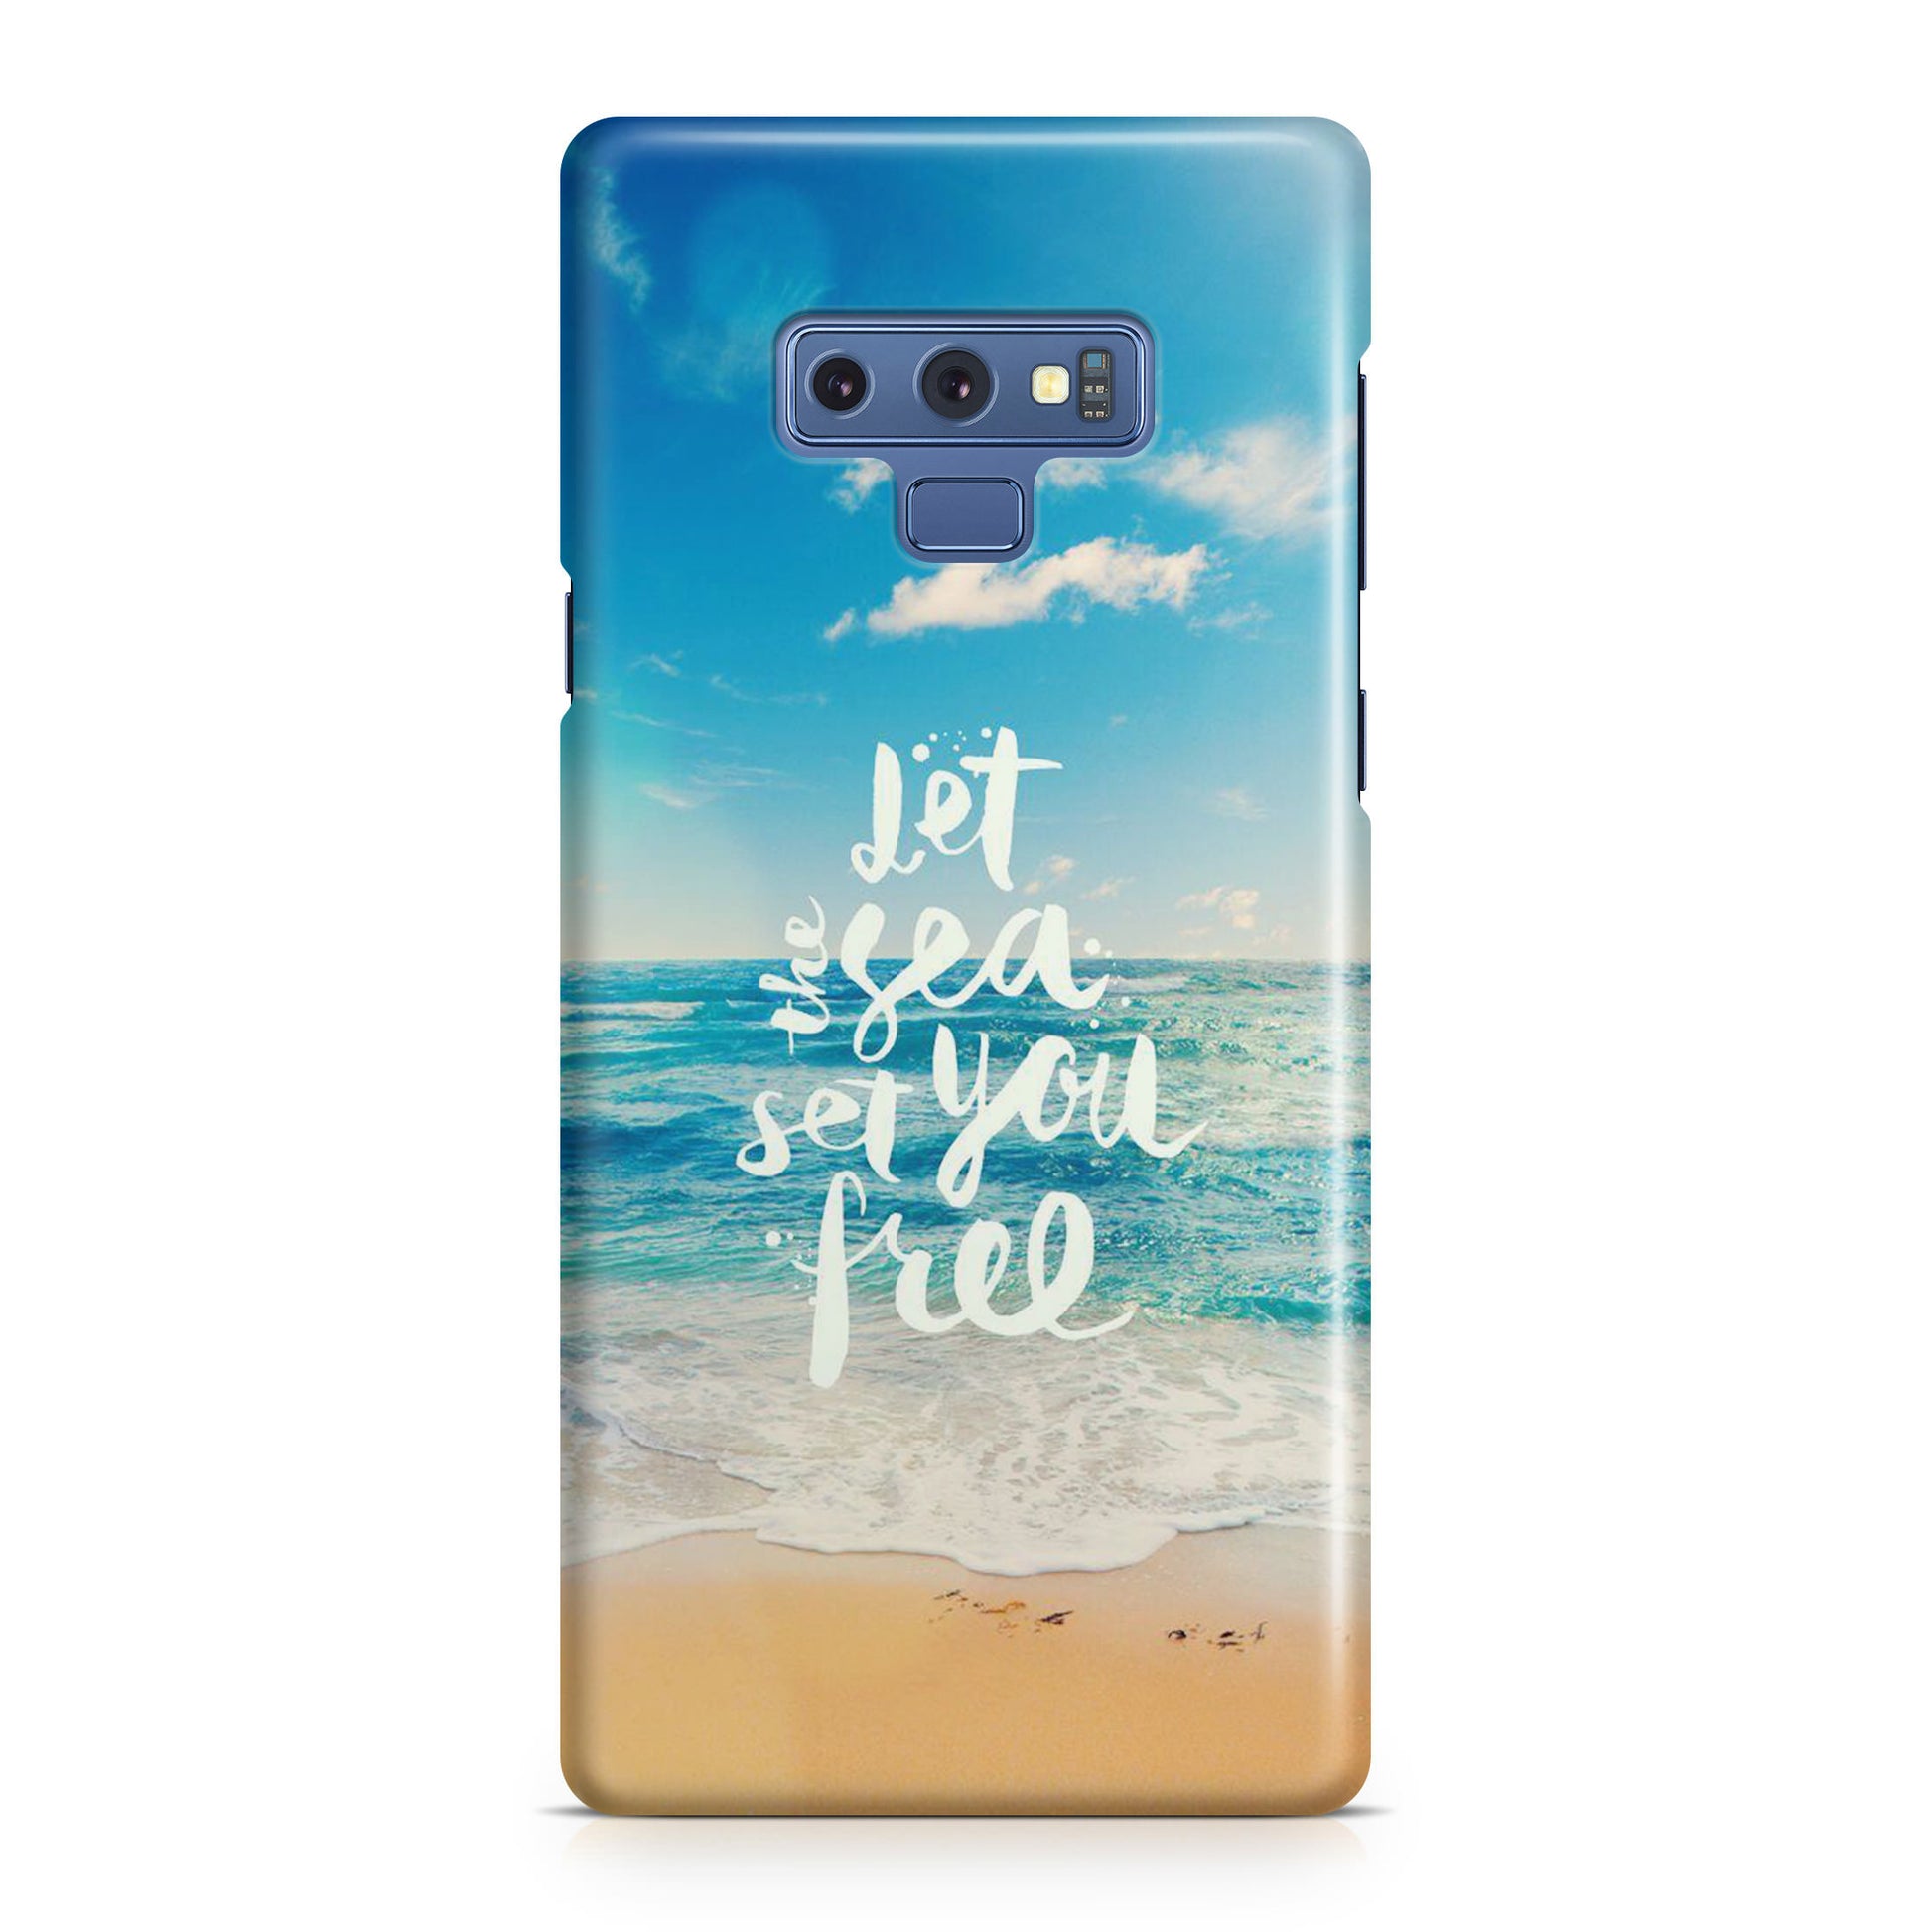 The Sea Set You Free Galaxy Note 9 Case